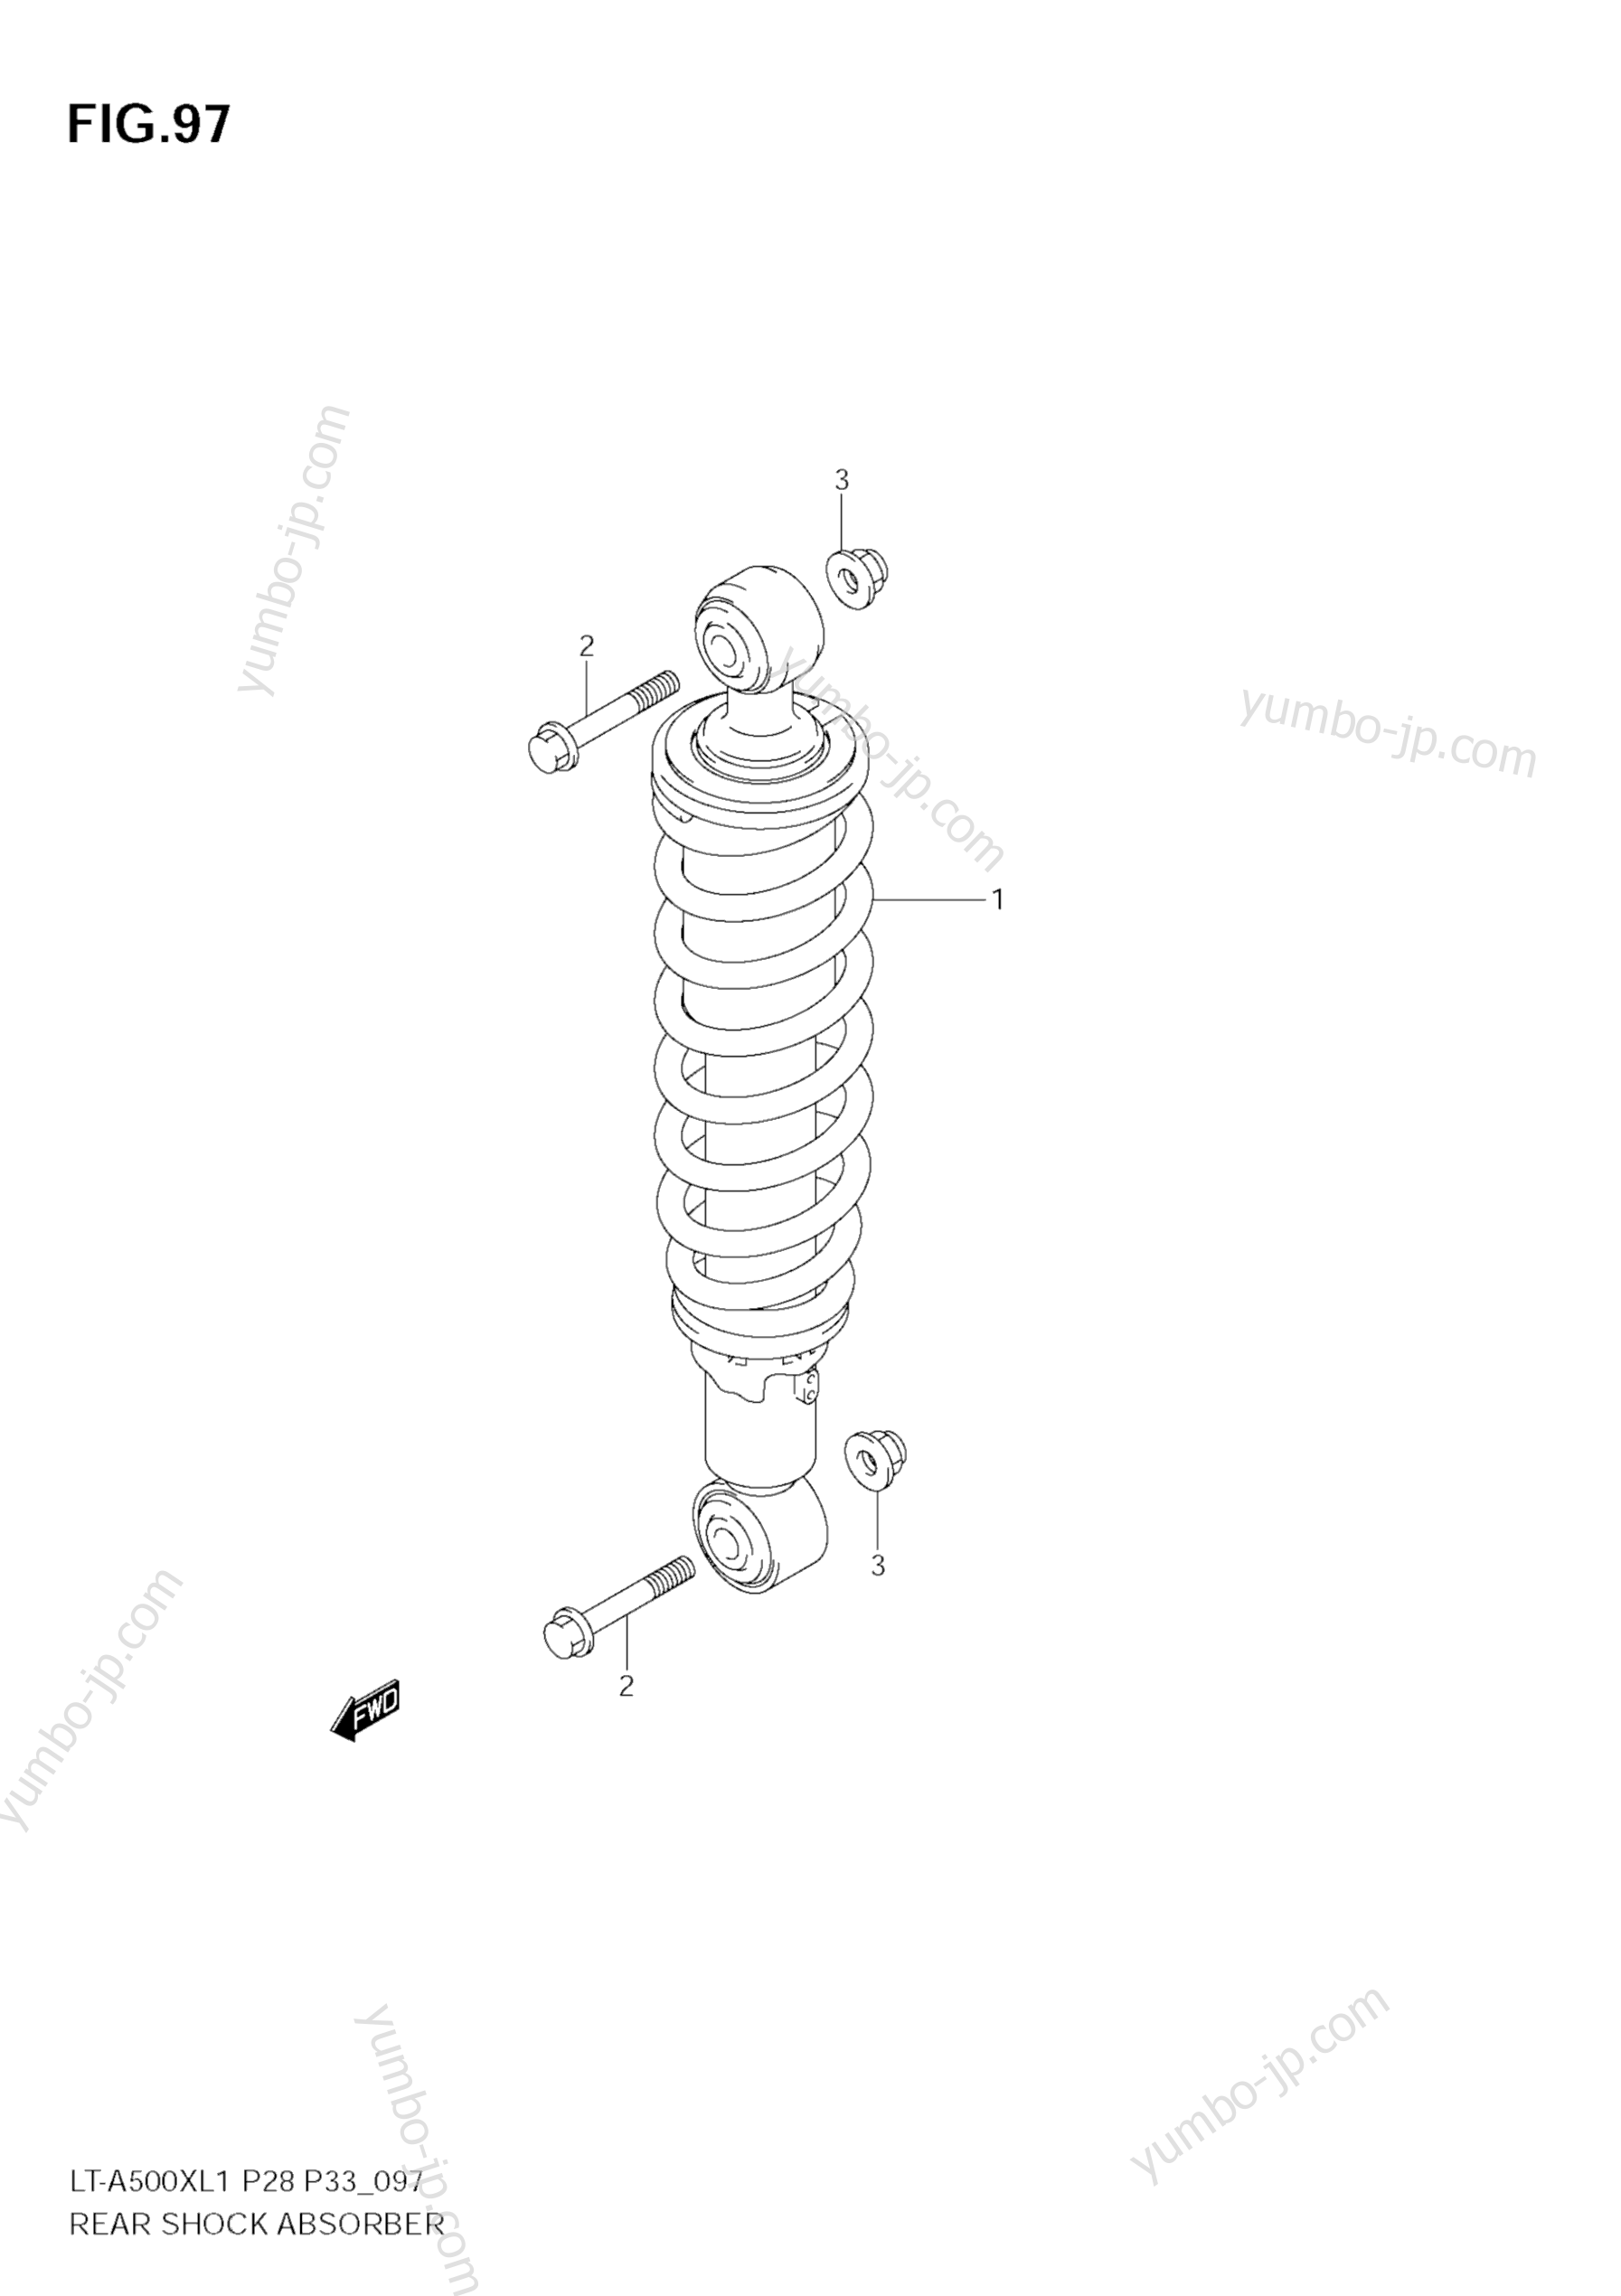 REAR SHOCK ABSORBER for ATVs SUZUKI KingQuad (LT-A500XZ) 2011 year